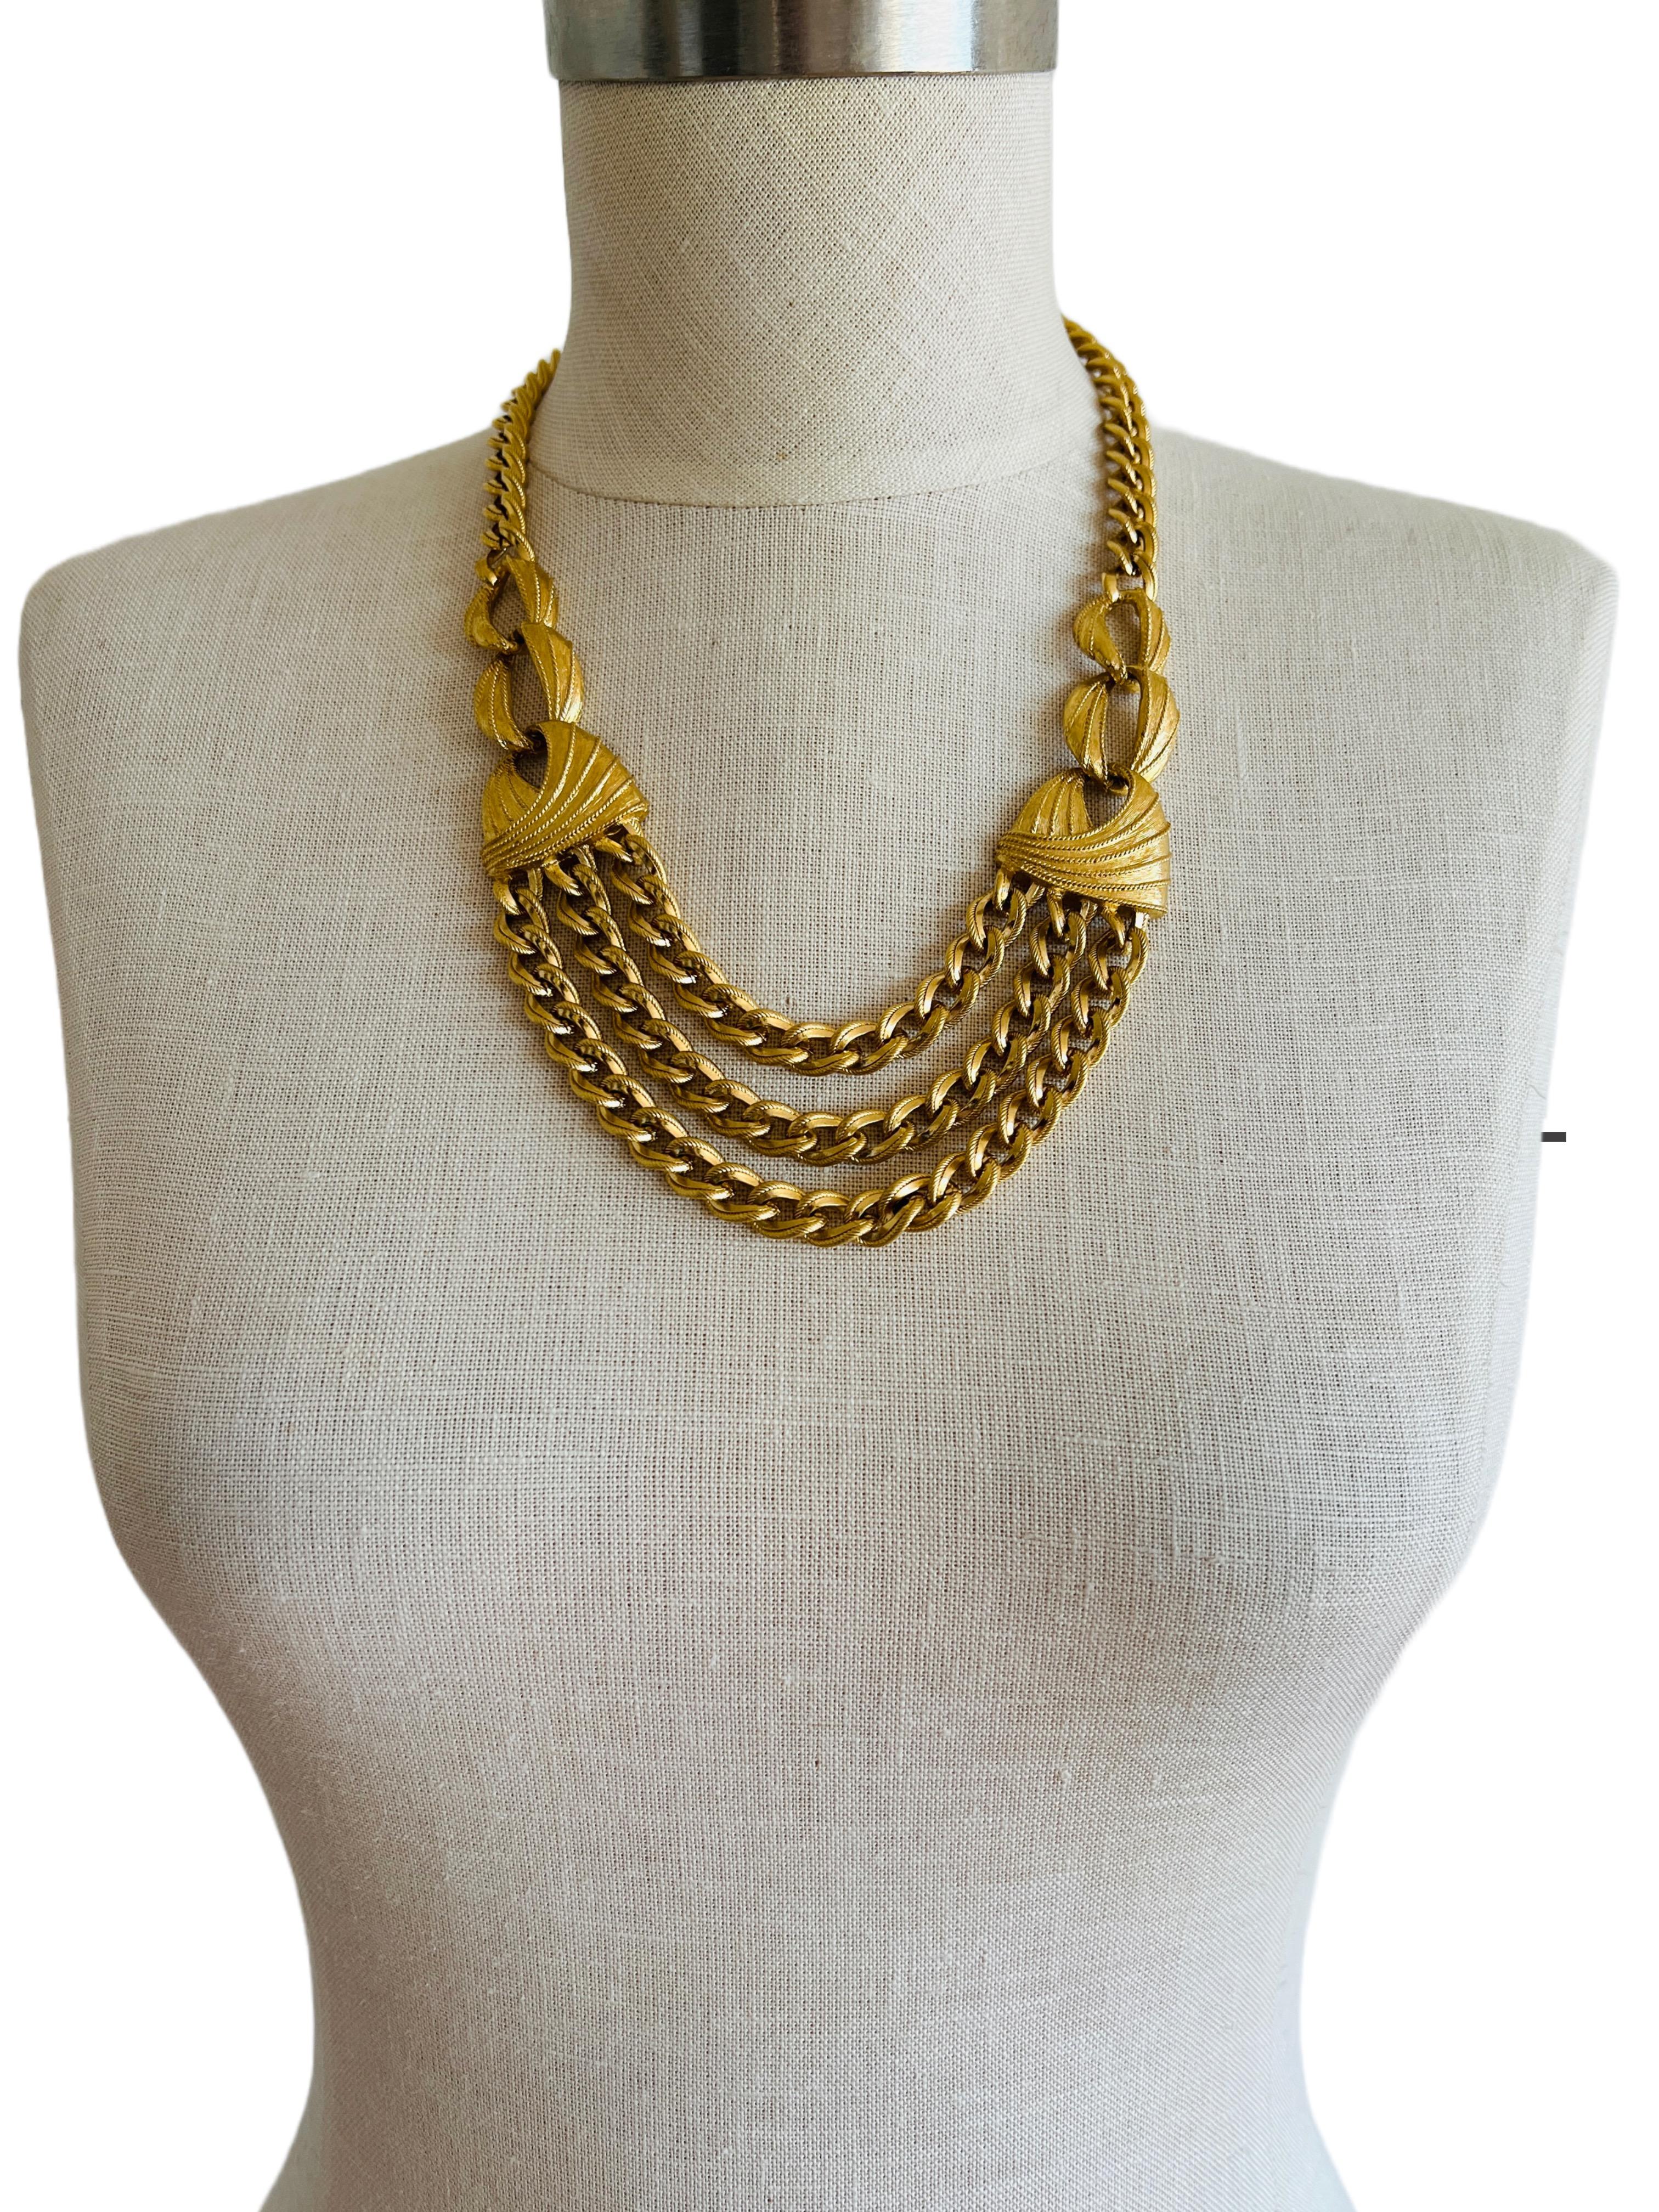 This weighty necklace showcases a blend of classic charm and modern elegance. At its heart lies a trio of curb chains, creating a tiered effect that drapes elegantly across the collarbone. Each chain is composed of flat, closely-set cable links that